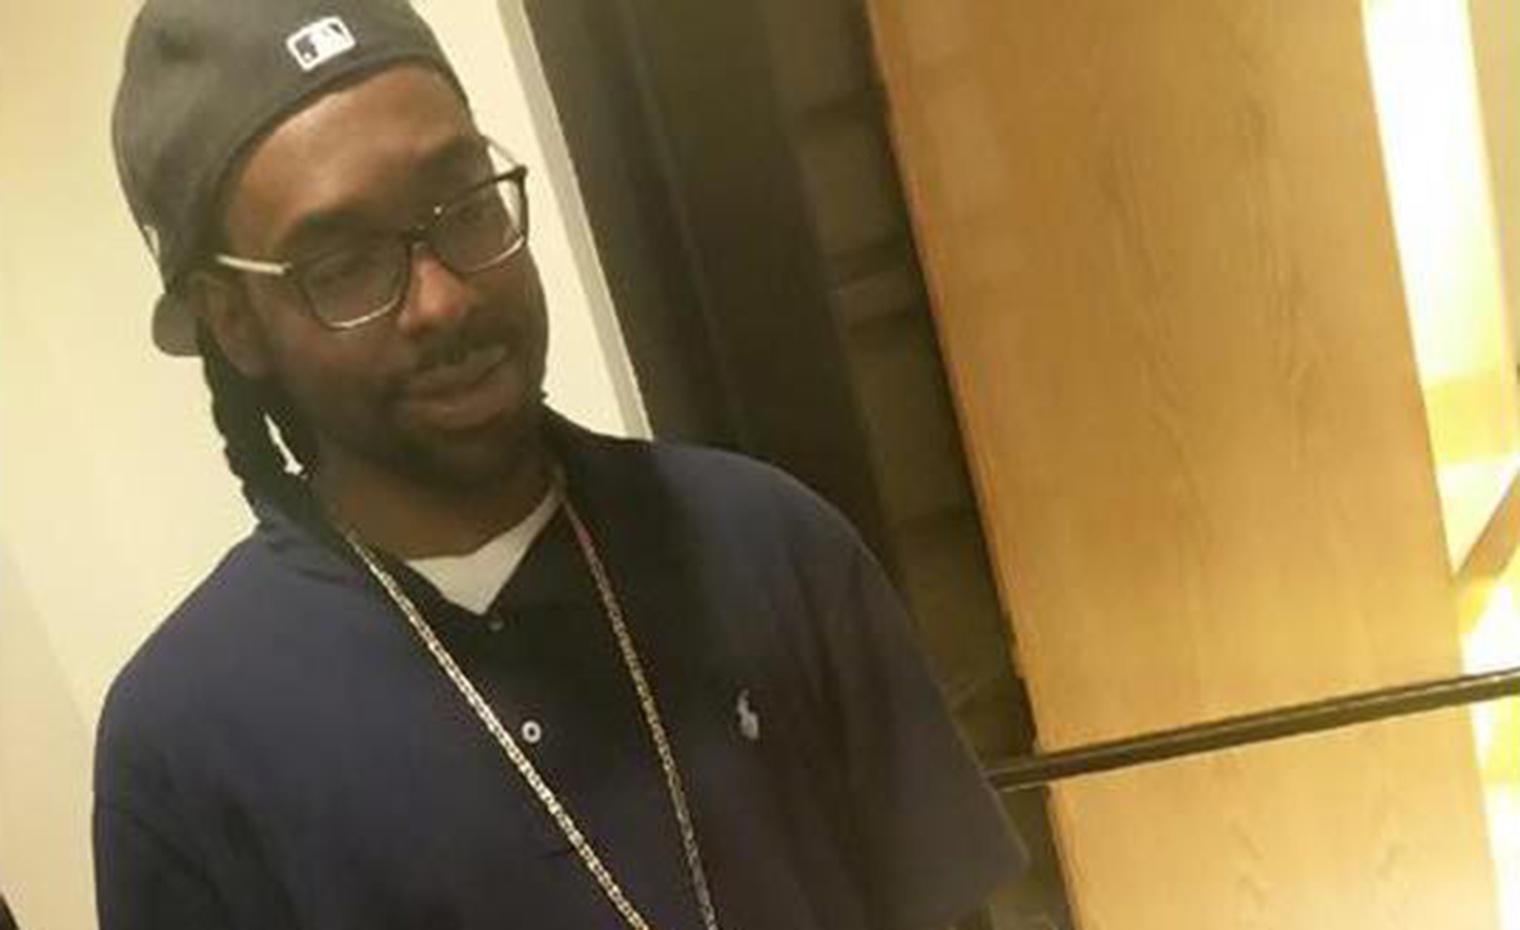 Mr Castile's killer was acquitted on all charges related to his death